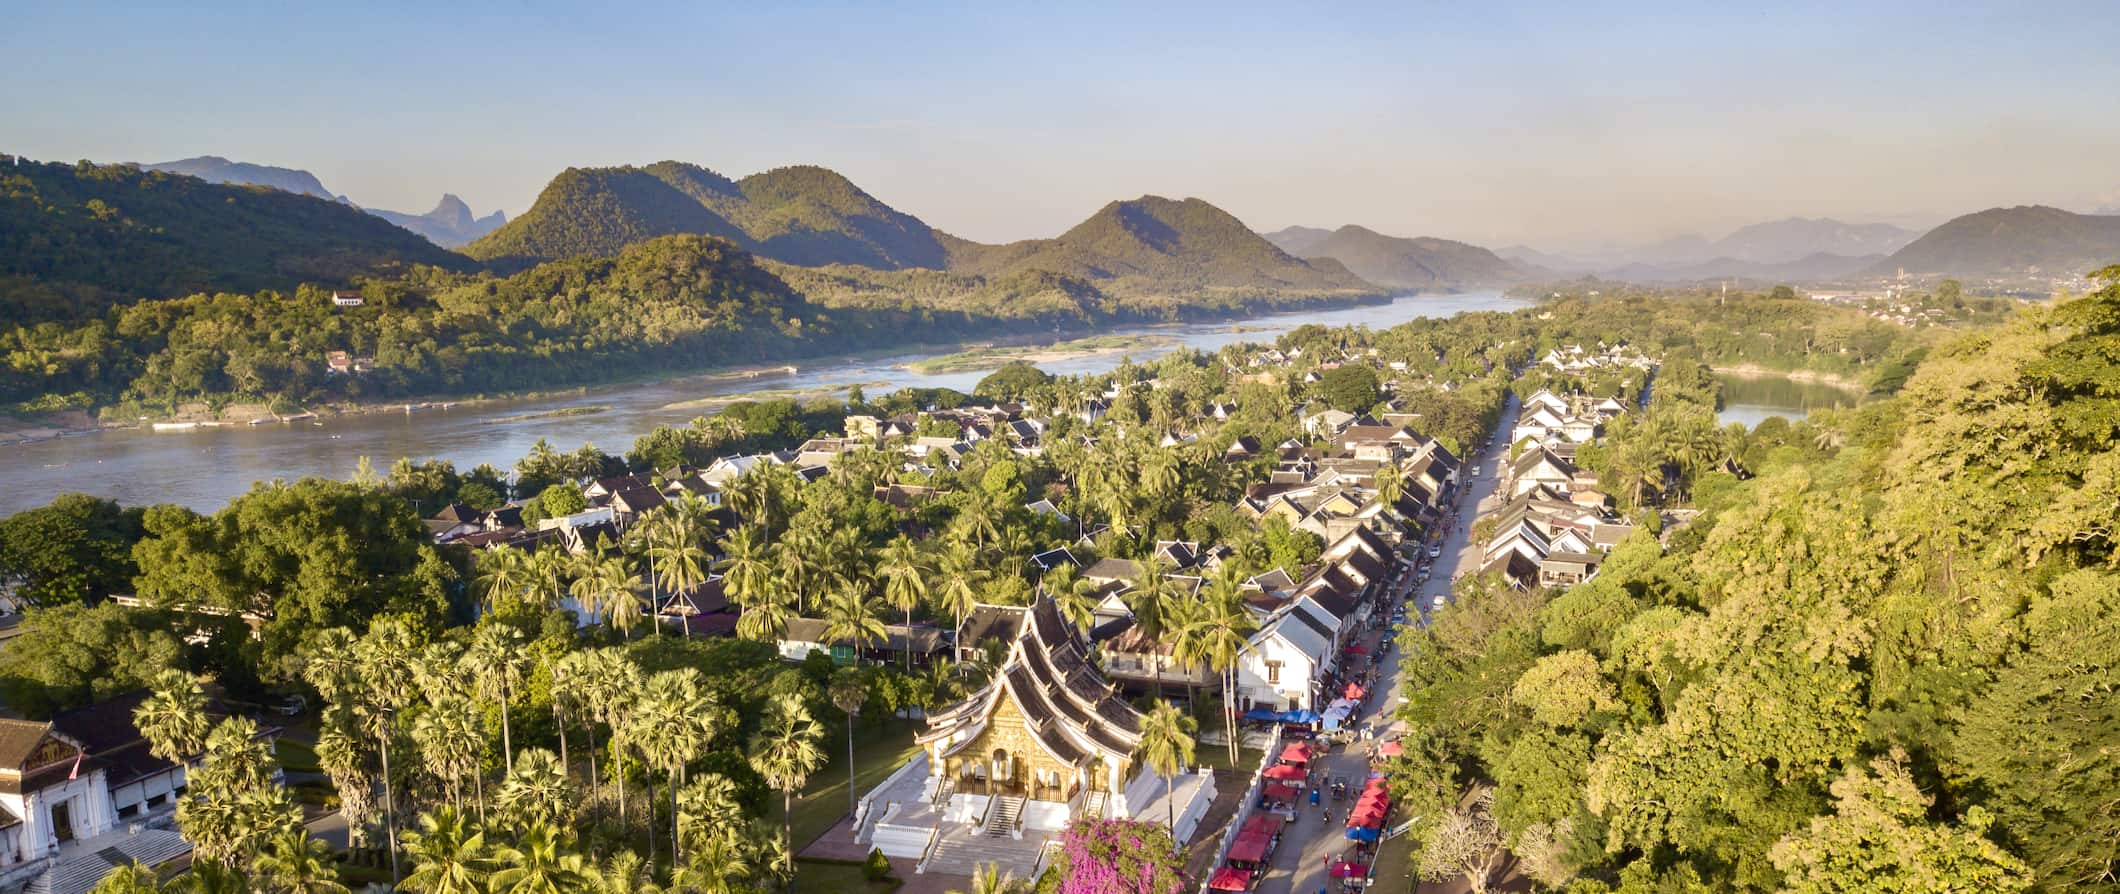 An aerial view of lush Luang Prabang in Laos, with mountains in the background